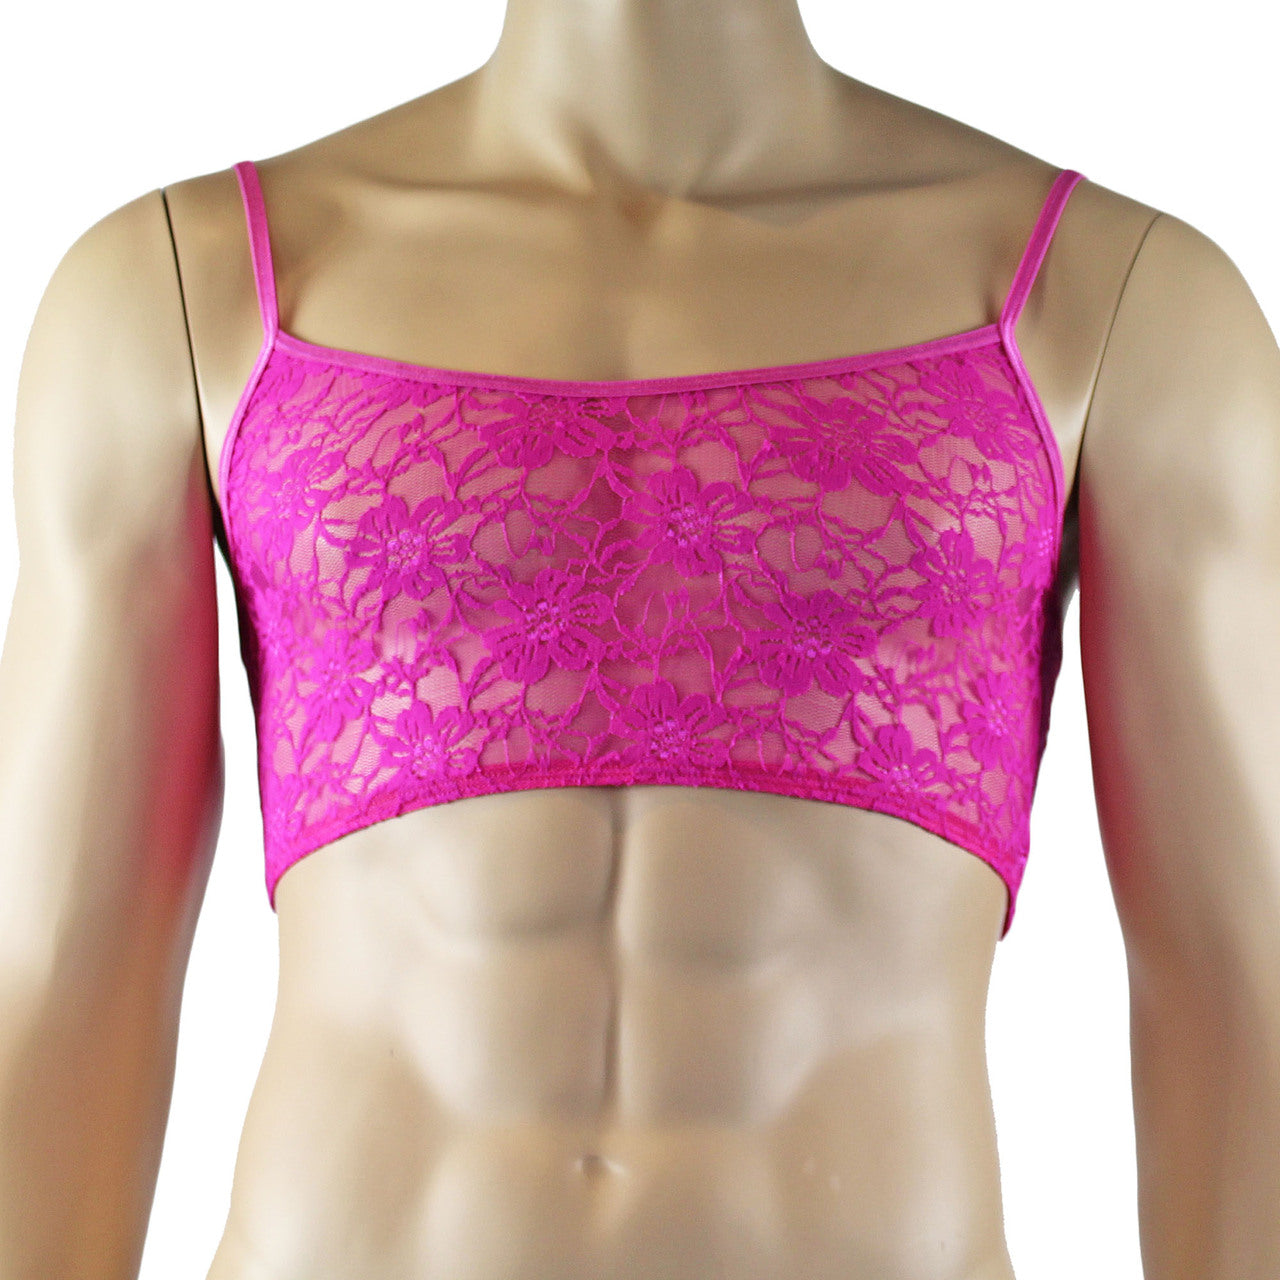 Mens Sexy Lace Crop Bra Top Camisole and Male Lingerie Panty Briefs Neon Pink